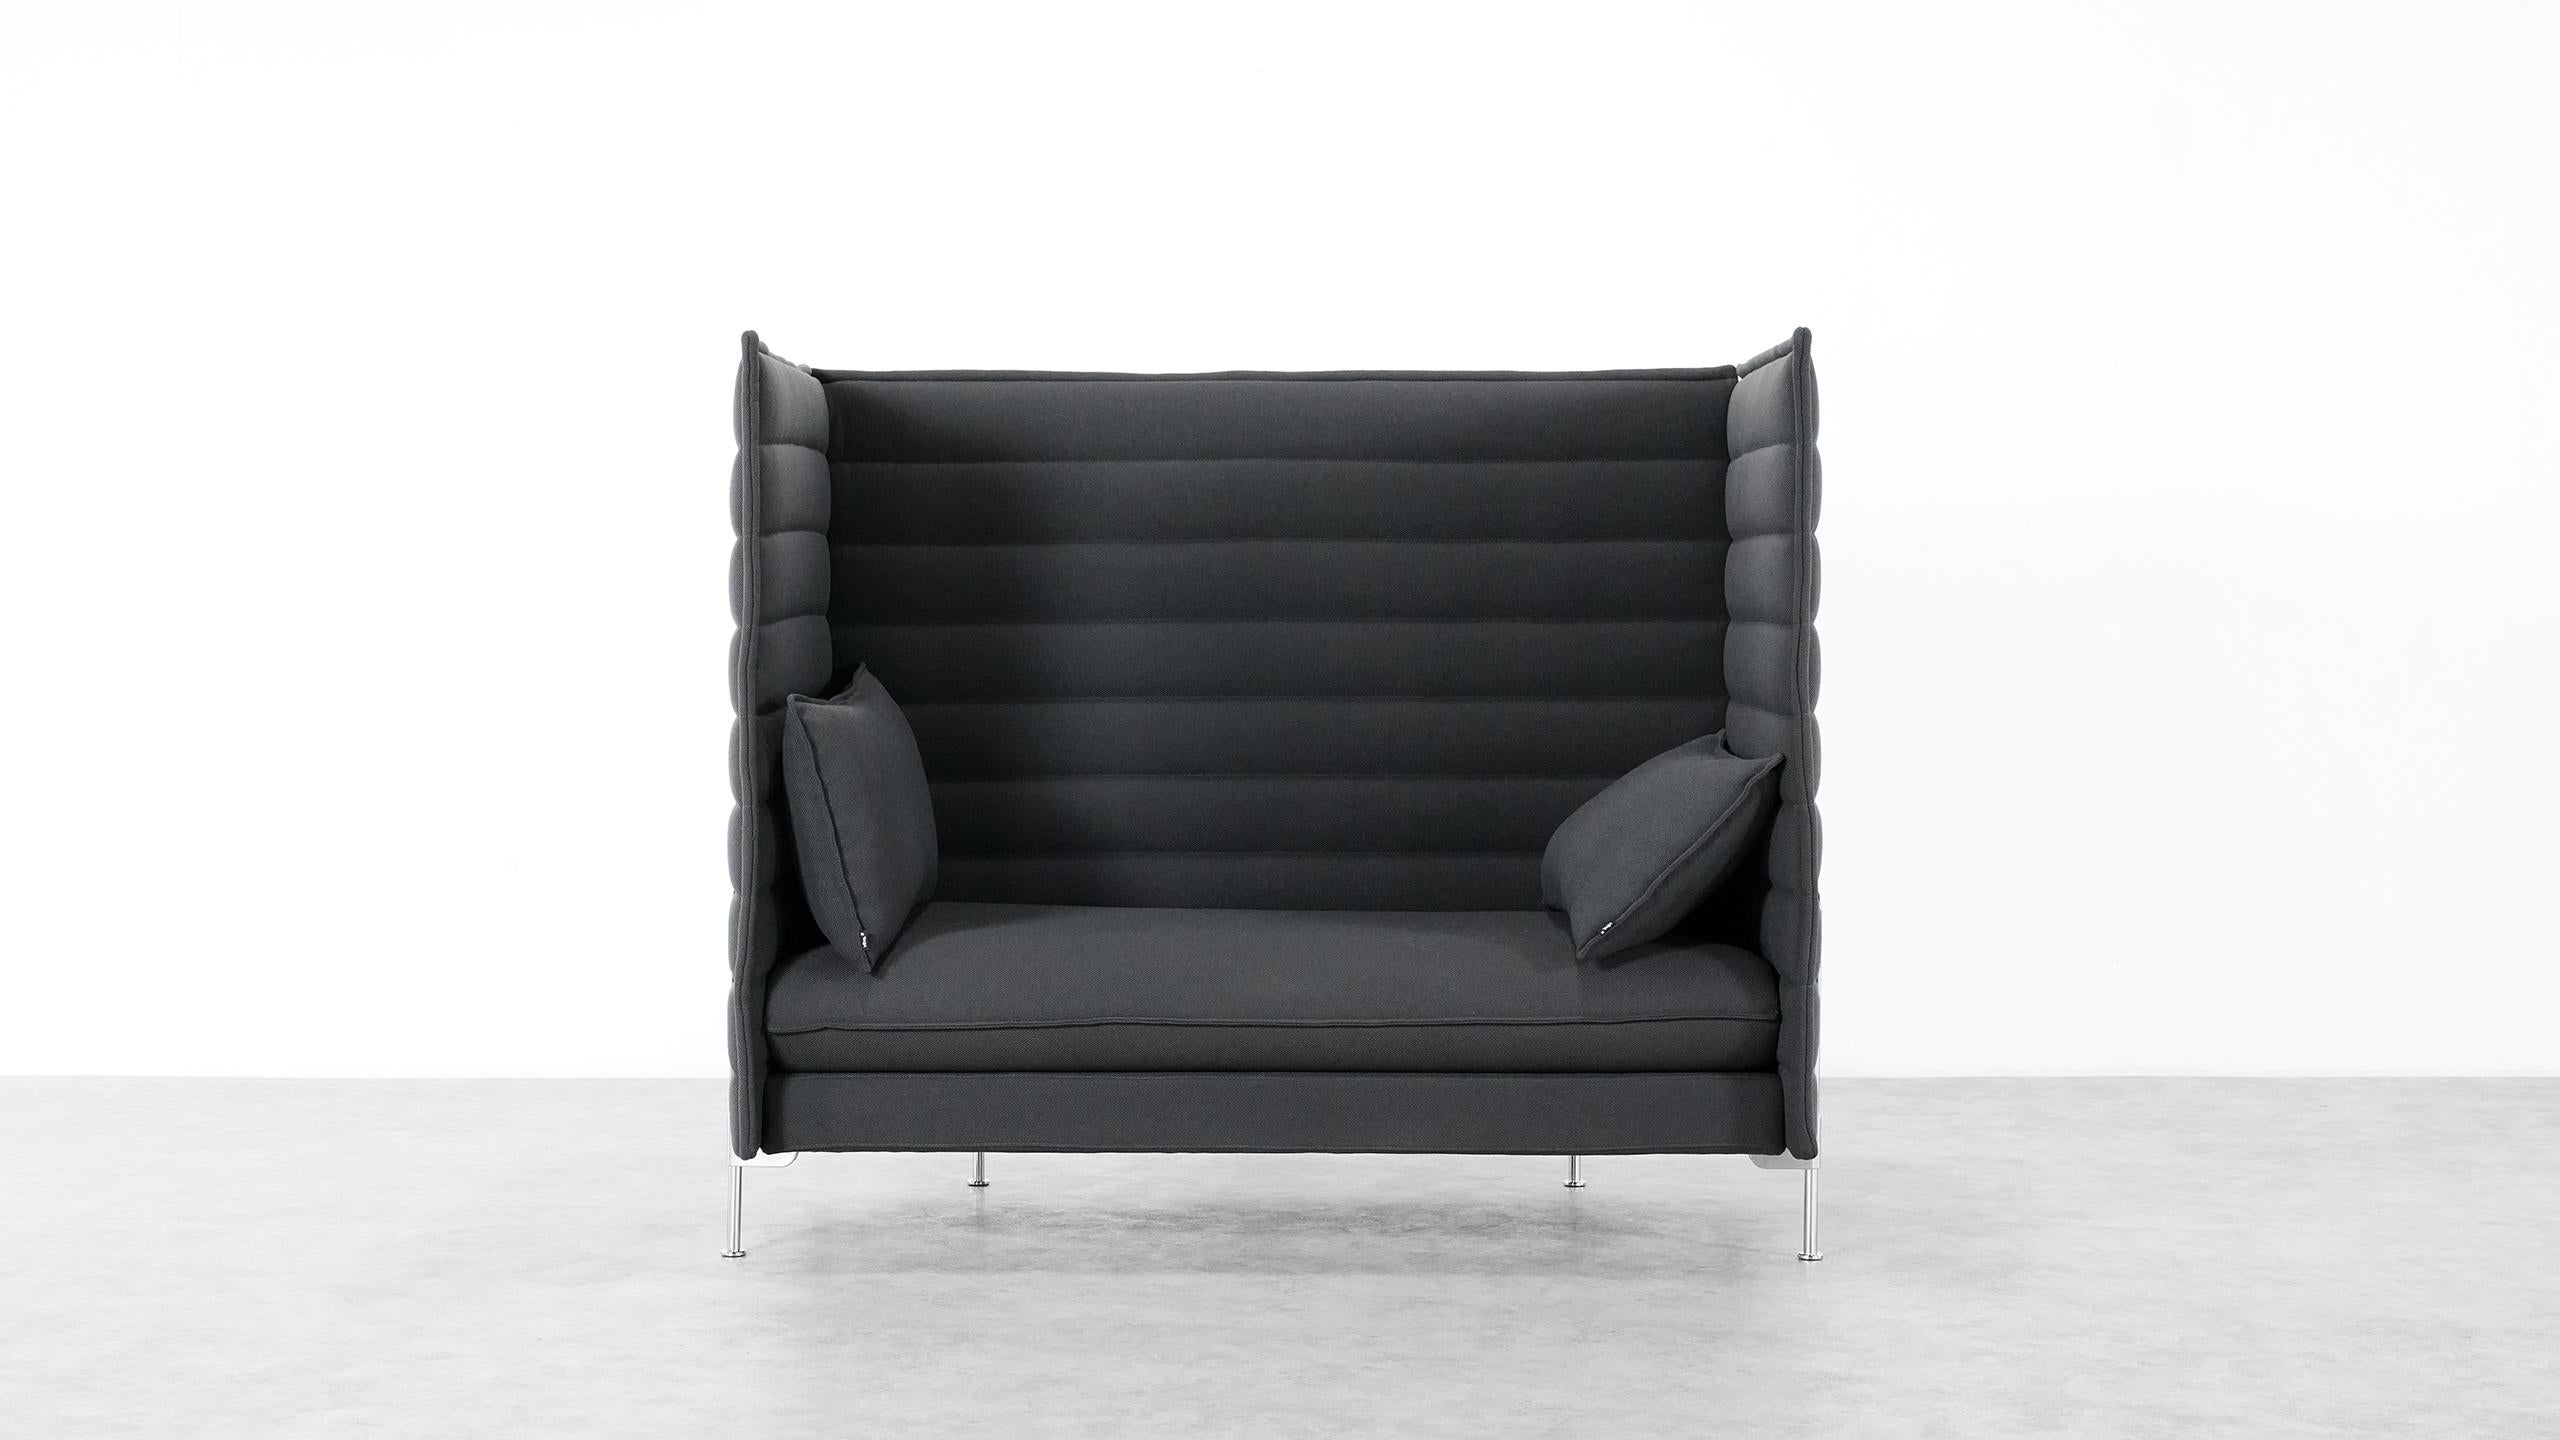 2x Vitra, Alcove highback sofa, ’room in a room’.
2006/8 by Ronan & Erwan Bouroullec (this offer is for both sofas).

The ’room in a room’ is a concept that Vitra has intensively pursued over many years in collaboration with the designers